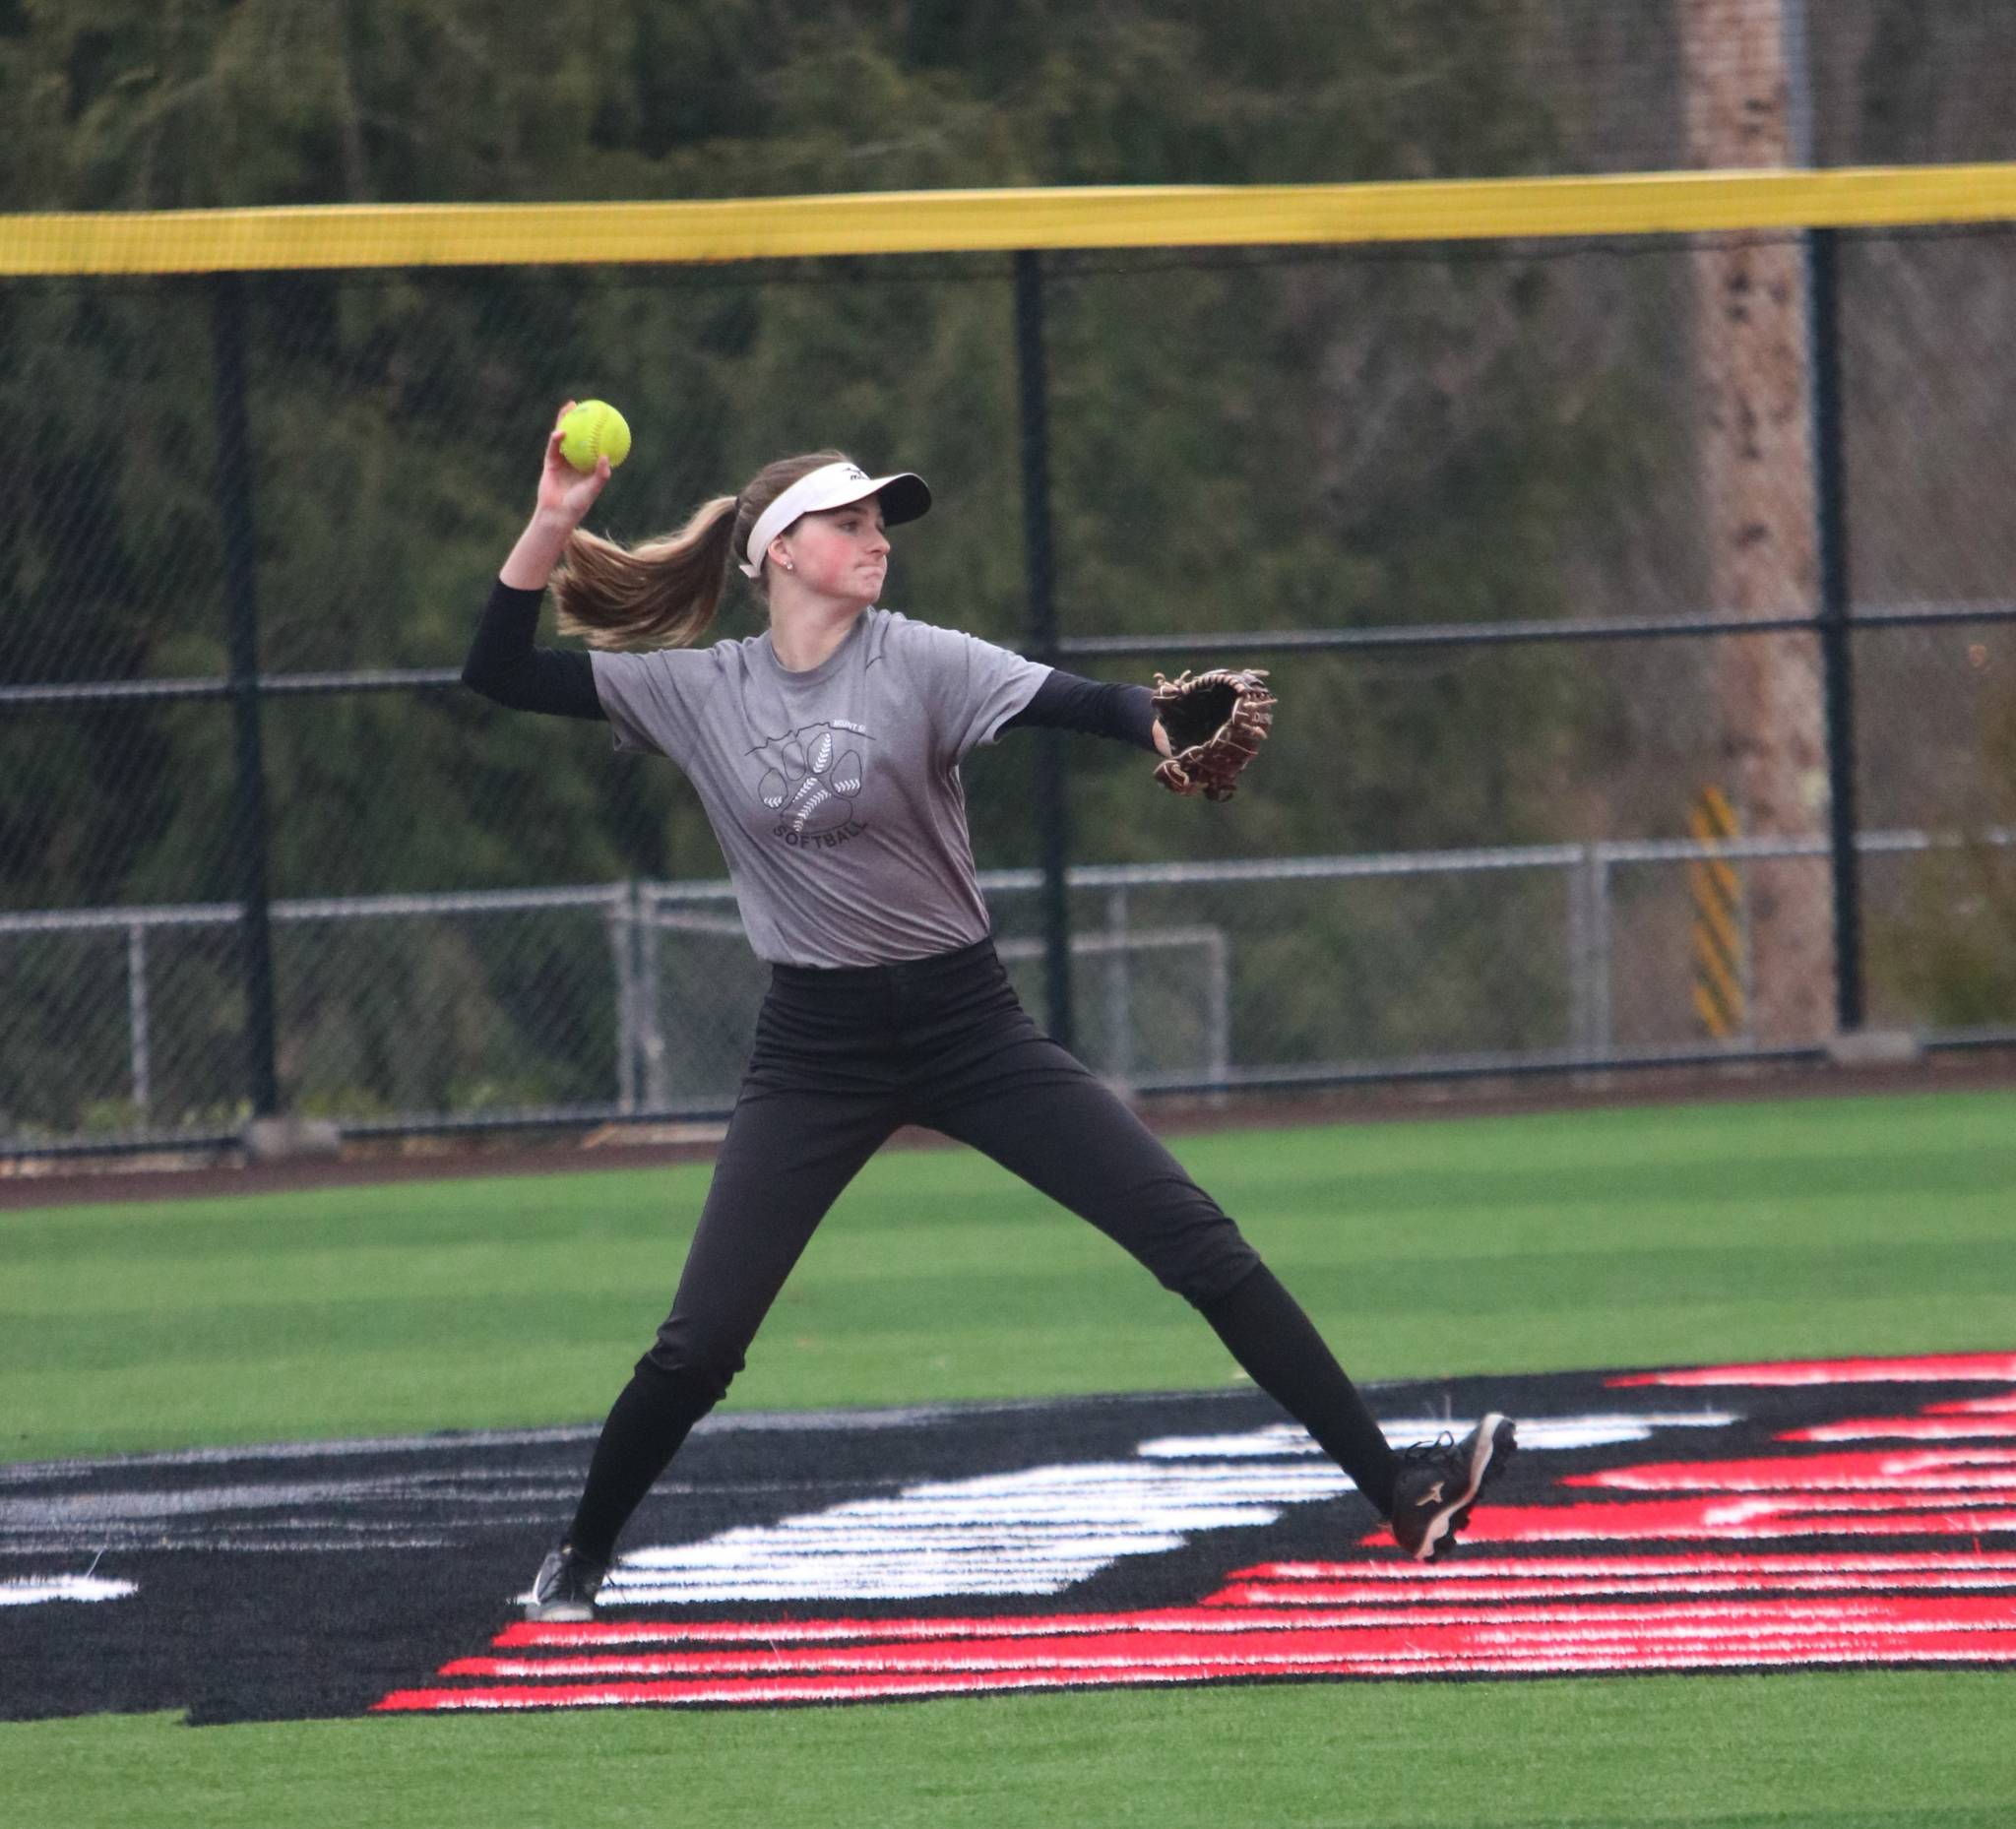 Molly Wilbourne makes a play in center field during a March 10 practice on the team’s new turf field. Andy Nystrom/ staff photo